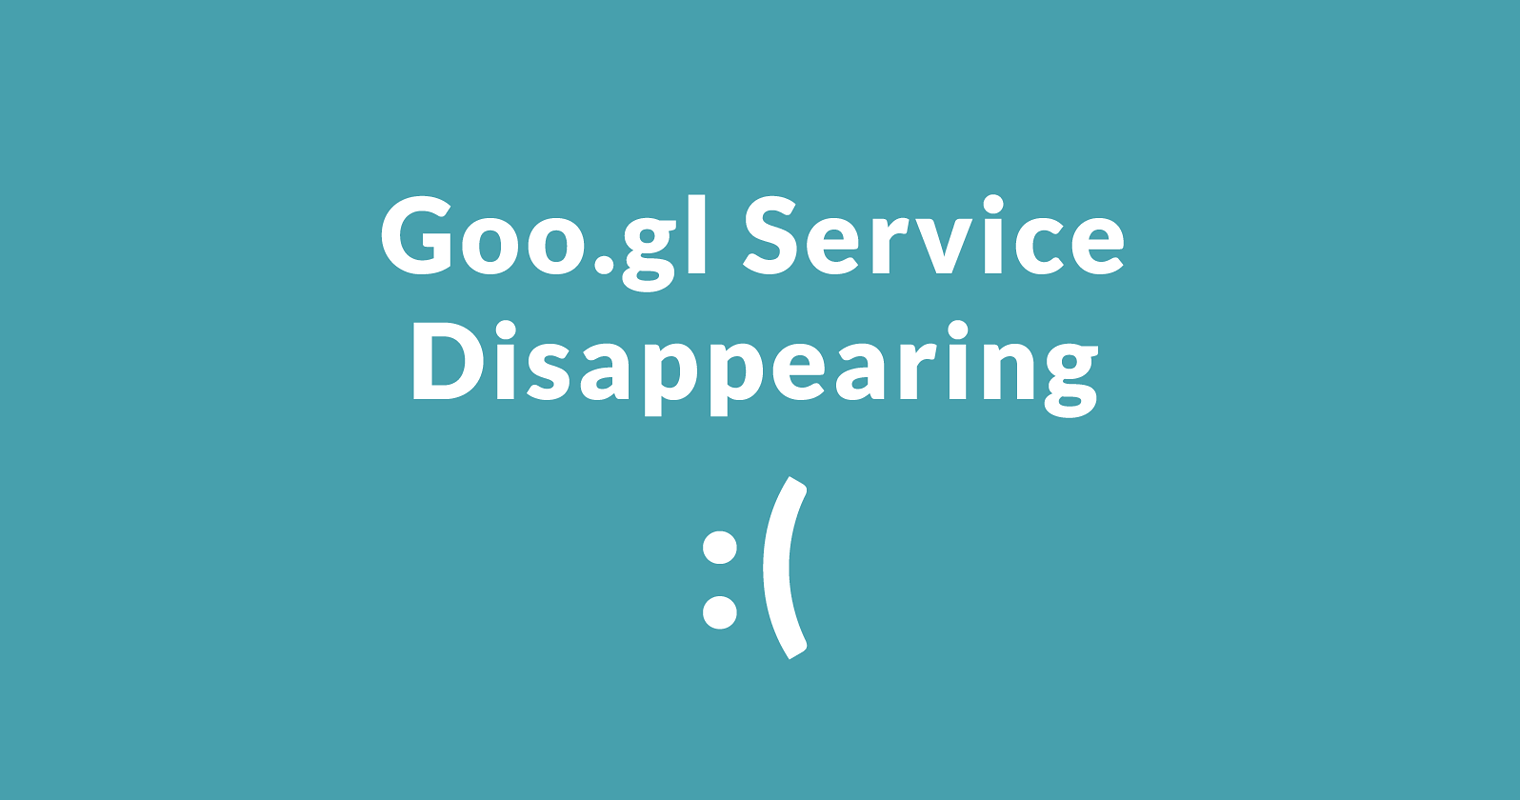 Goo.gl Shutting Down – These are Your Options